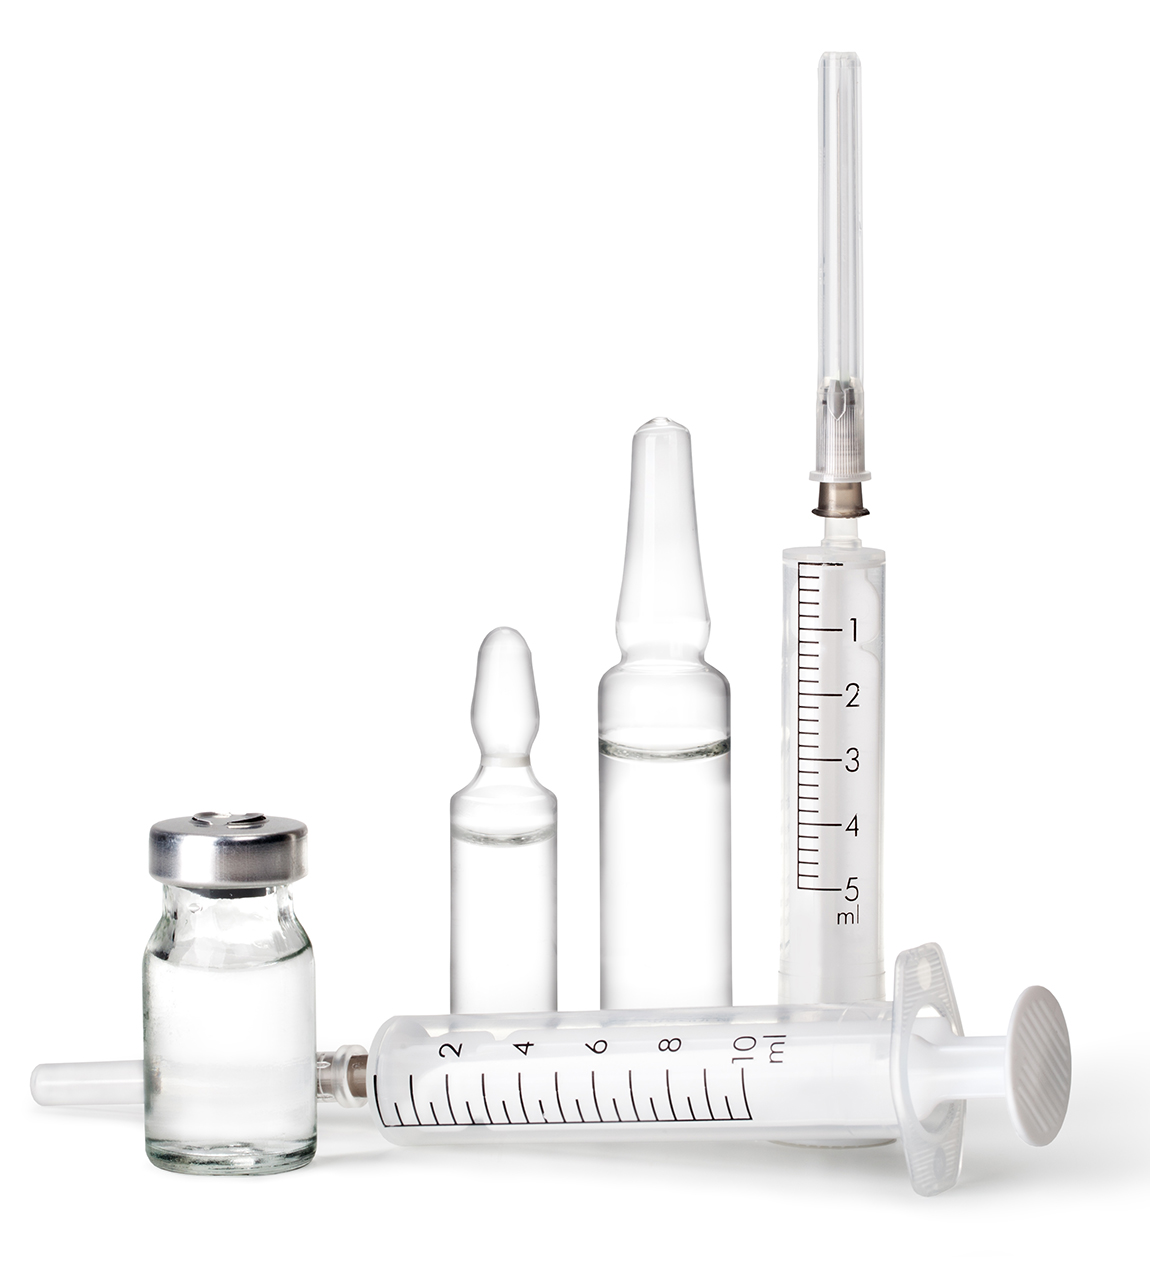 Group of clear pharmaceutical containers with a vial, two ampoules, and two syringes